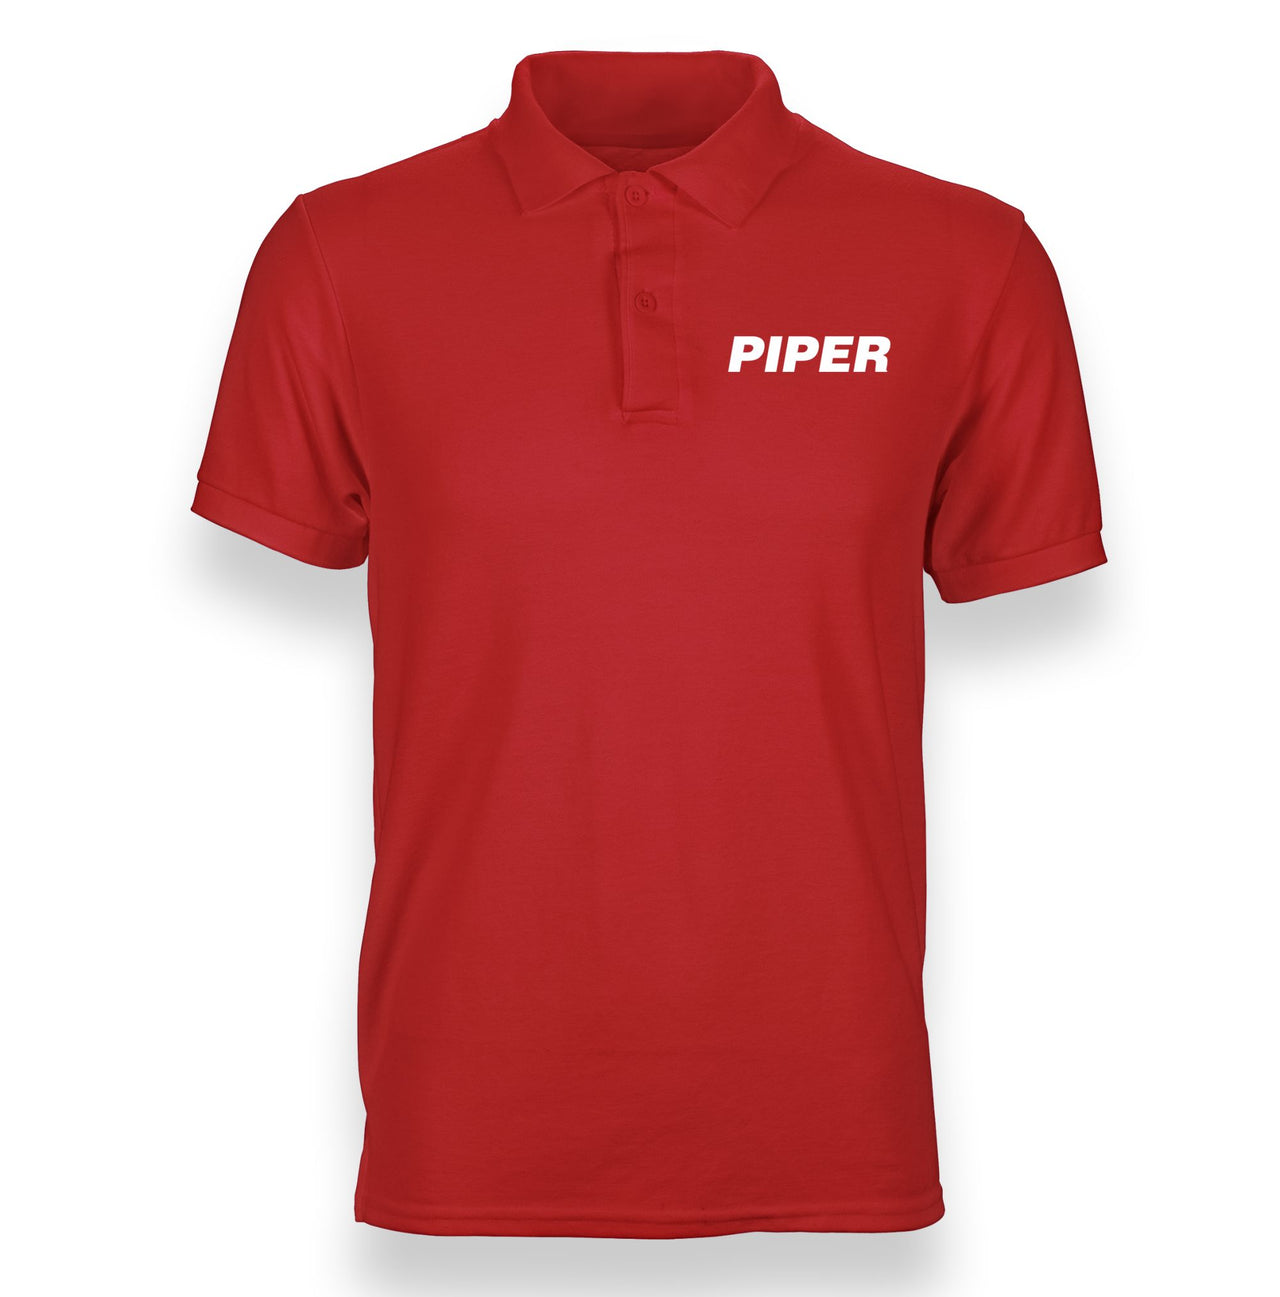 Piper & Text Designed "WOMEN" Polo T-Shirts